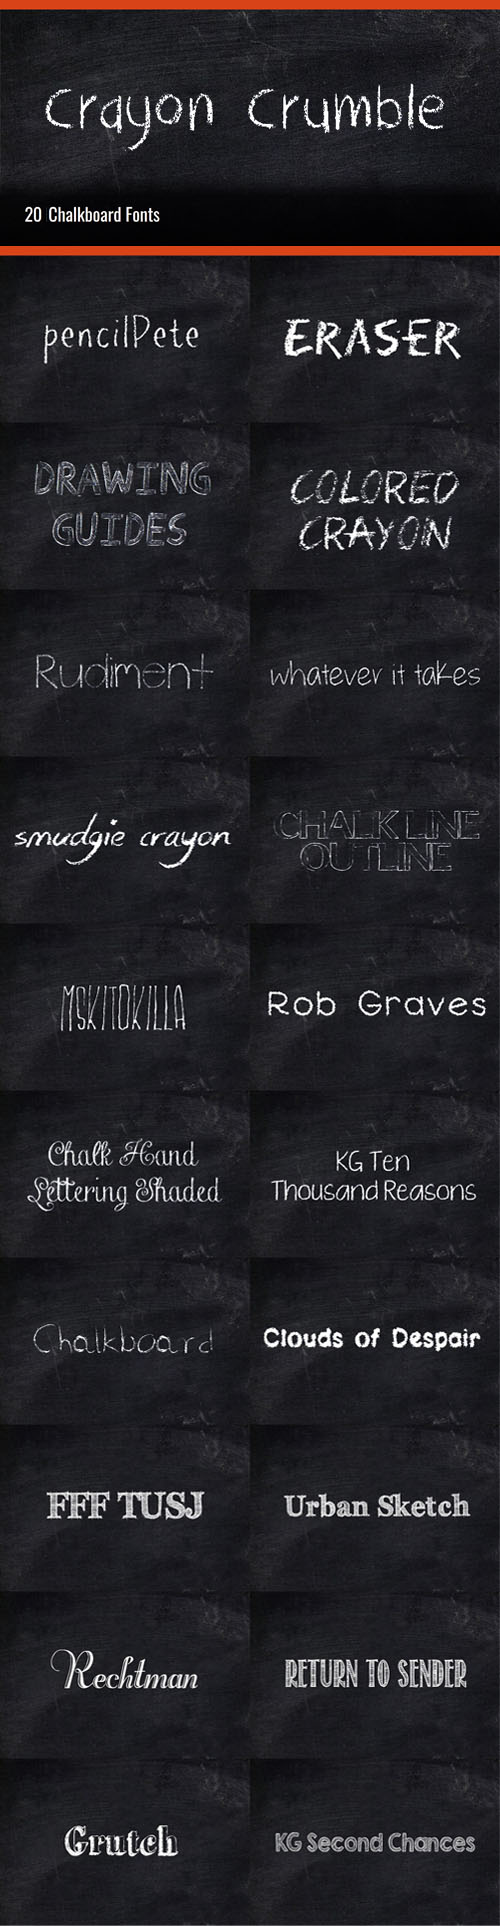 21 Chalkboard Fonts Collection